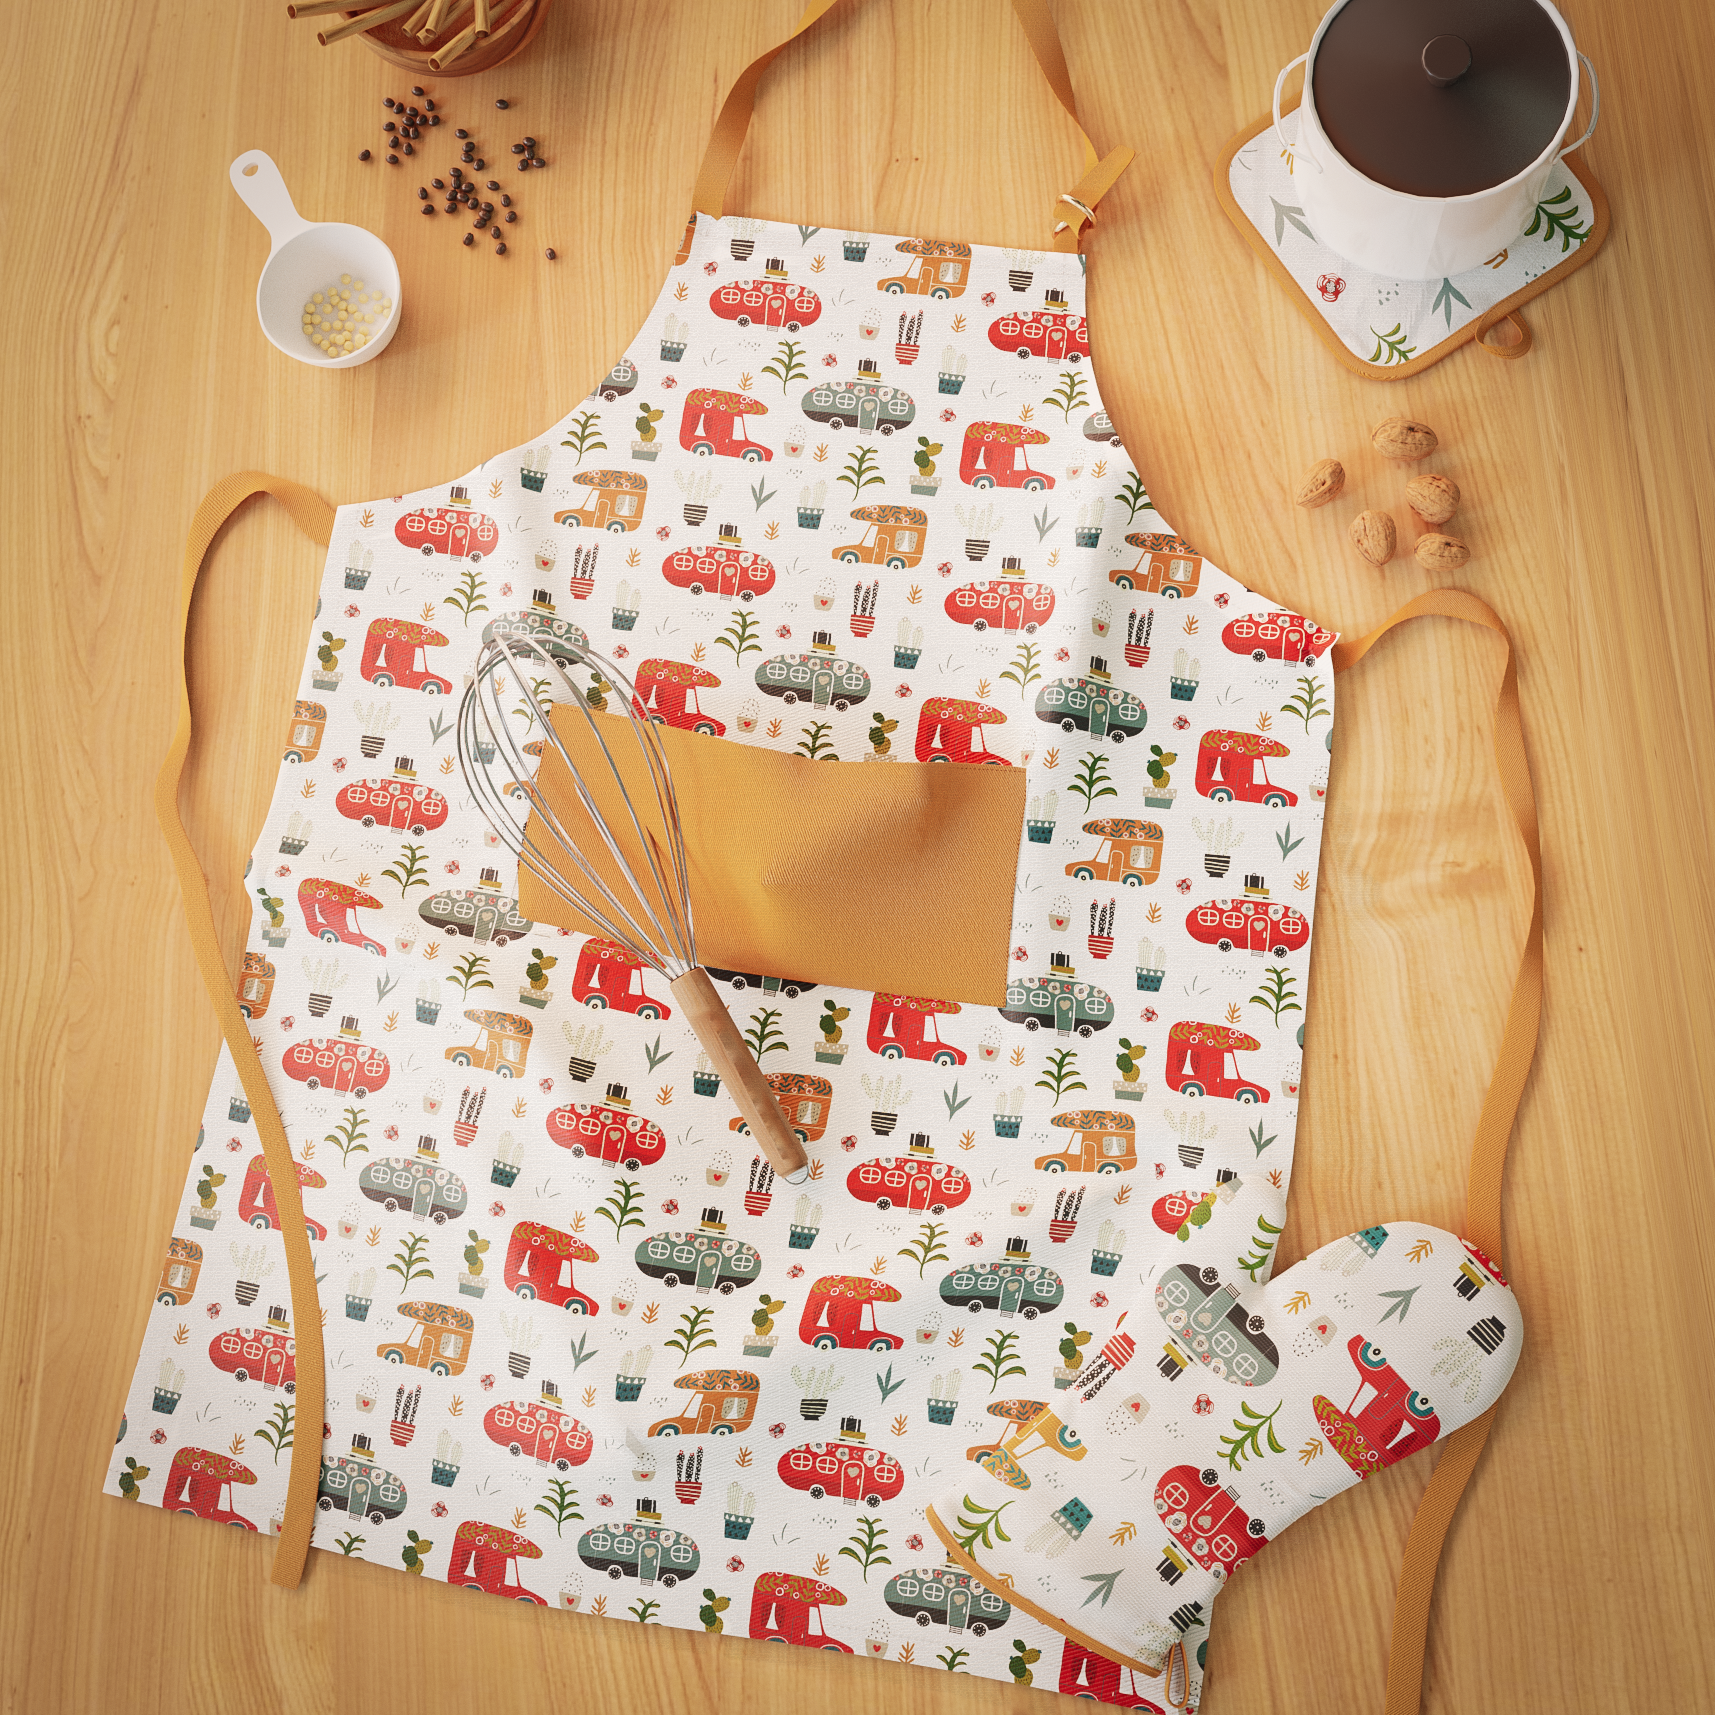 Apron from the 